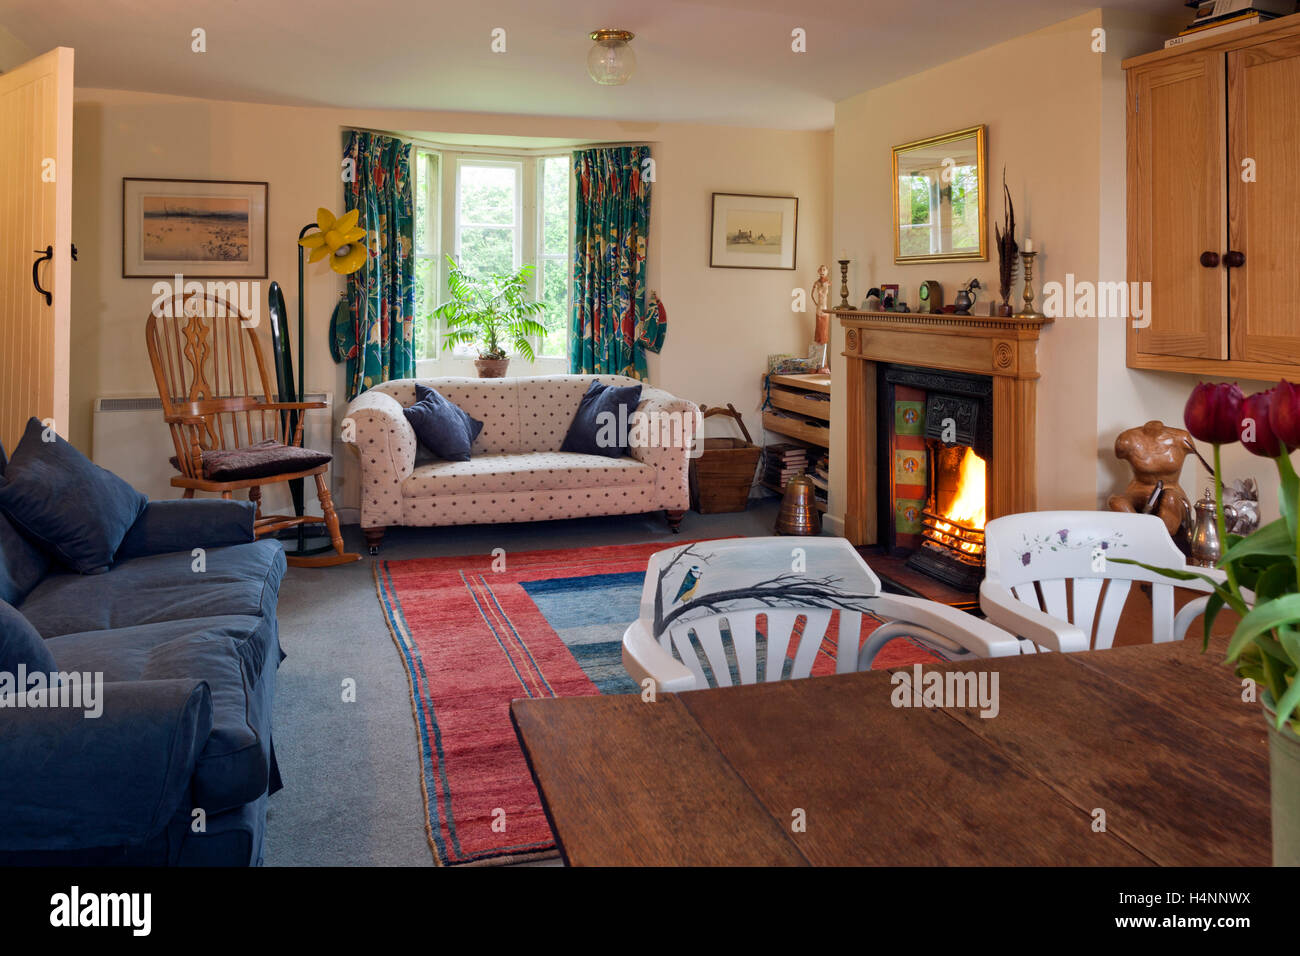 A traditionally furnished sitting room with an open fire Stock Photo